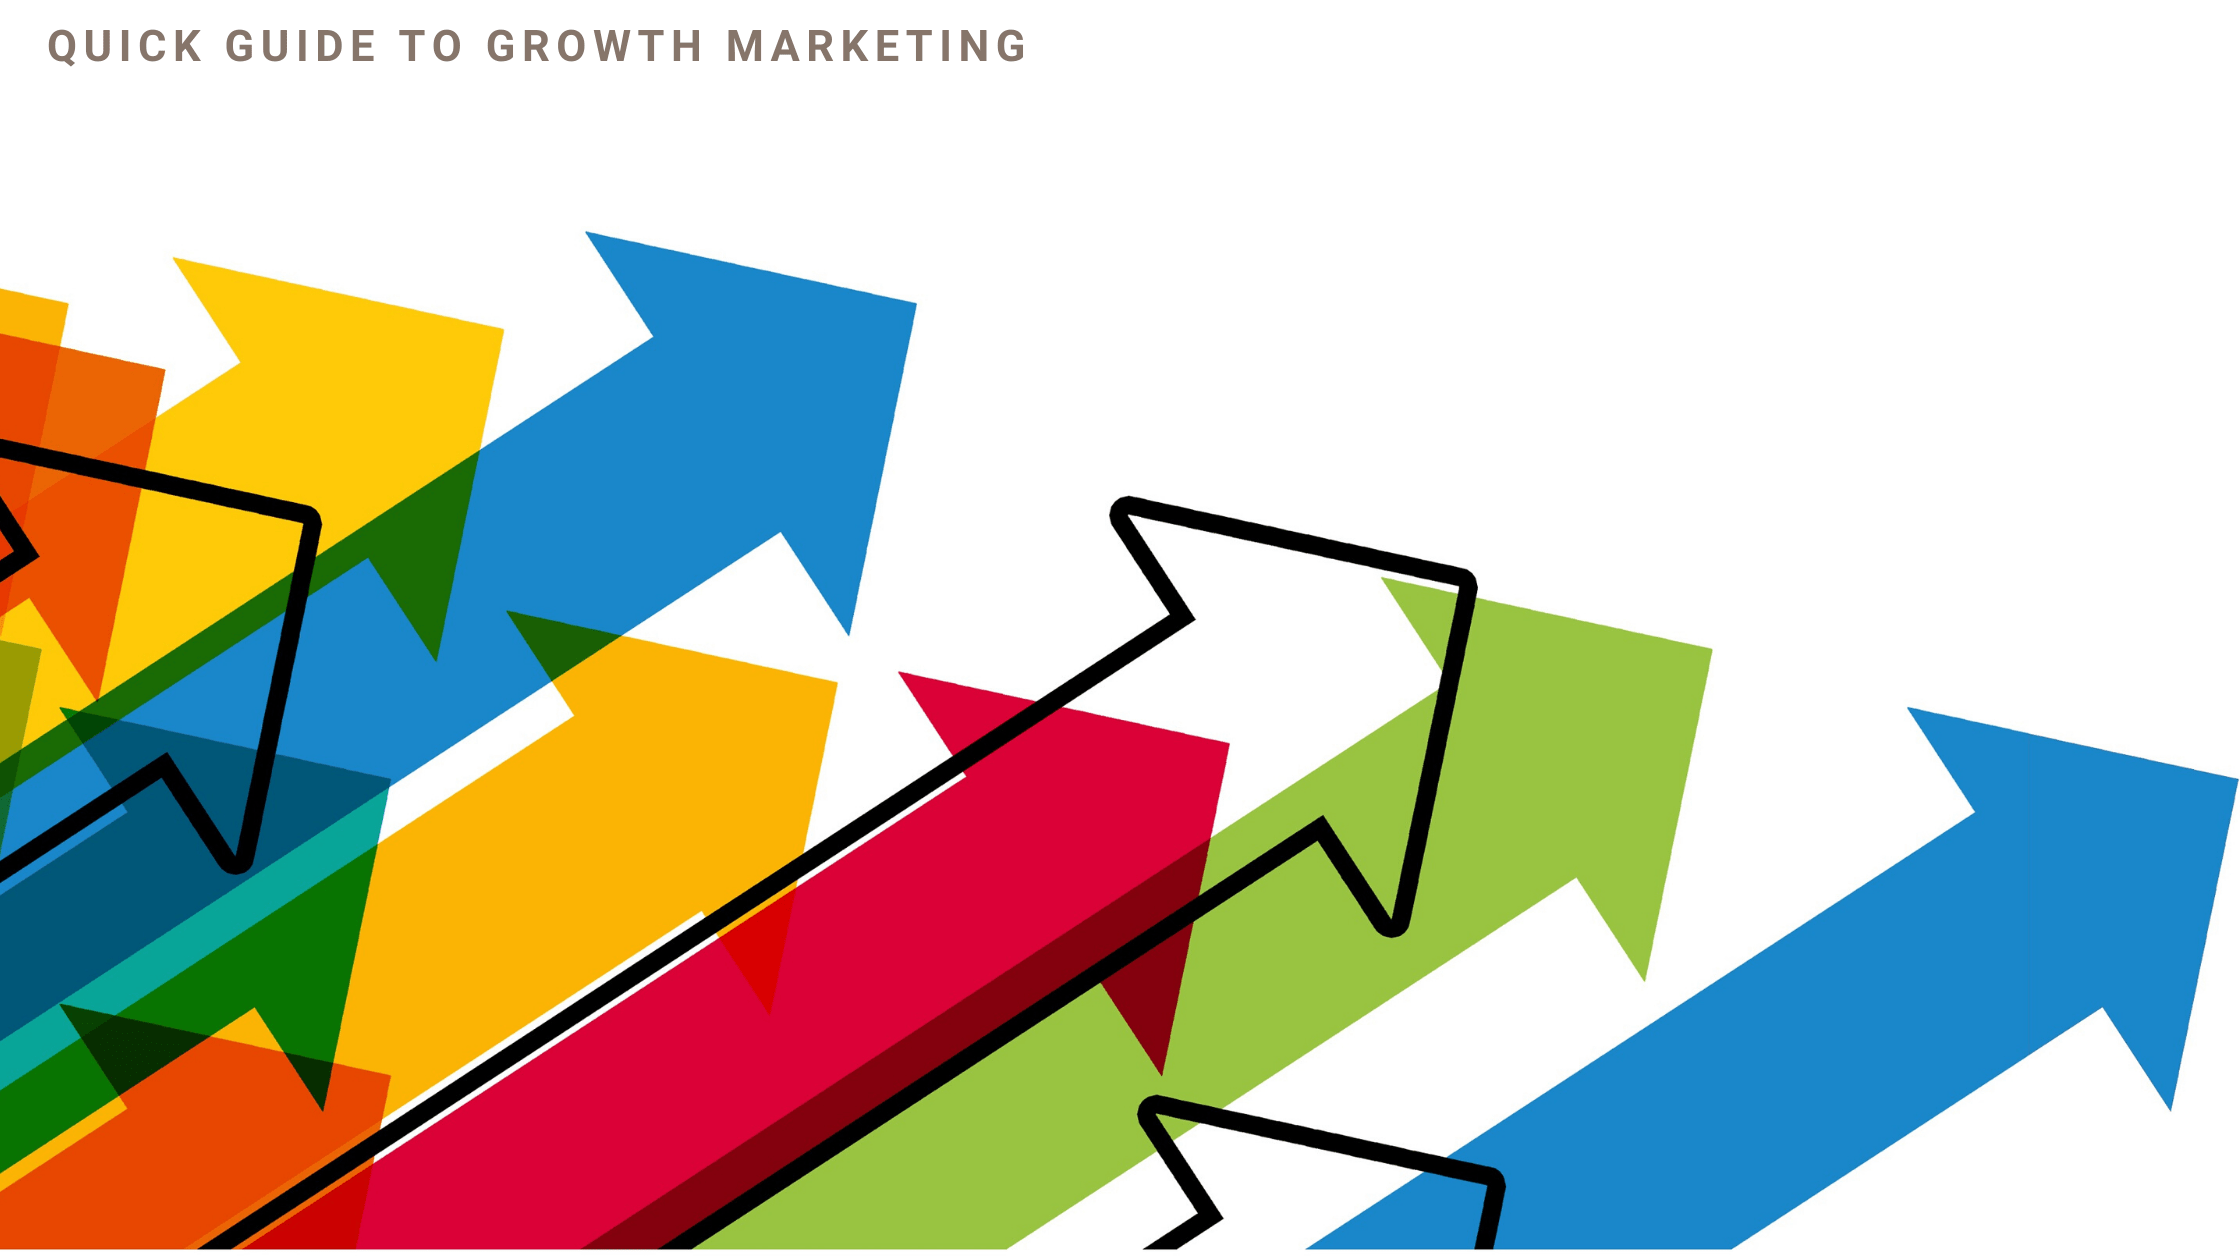 Growth marketing arrows going up